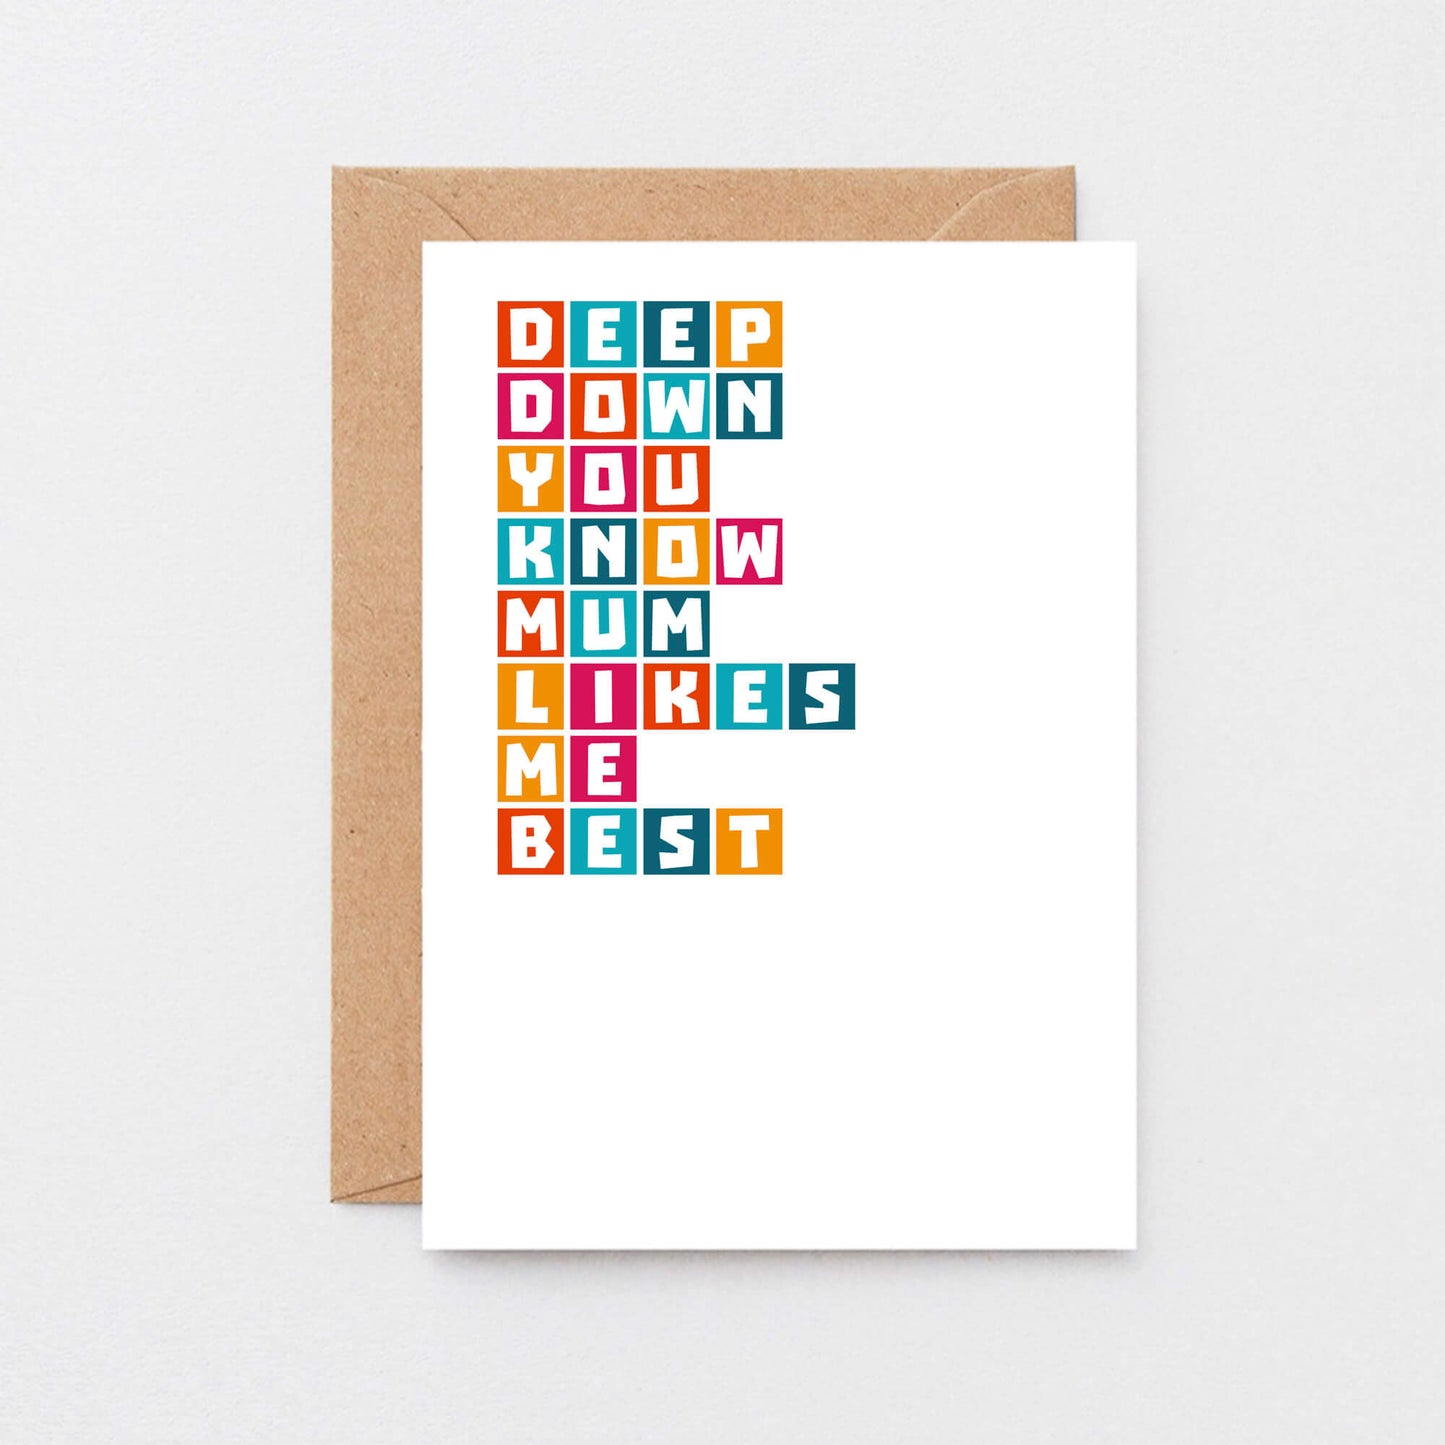 Brother Card by SixElevenCreations. Reads Deep down you know mum likes me best. Product Code SE0336A6